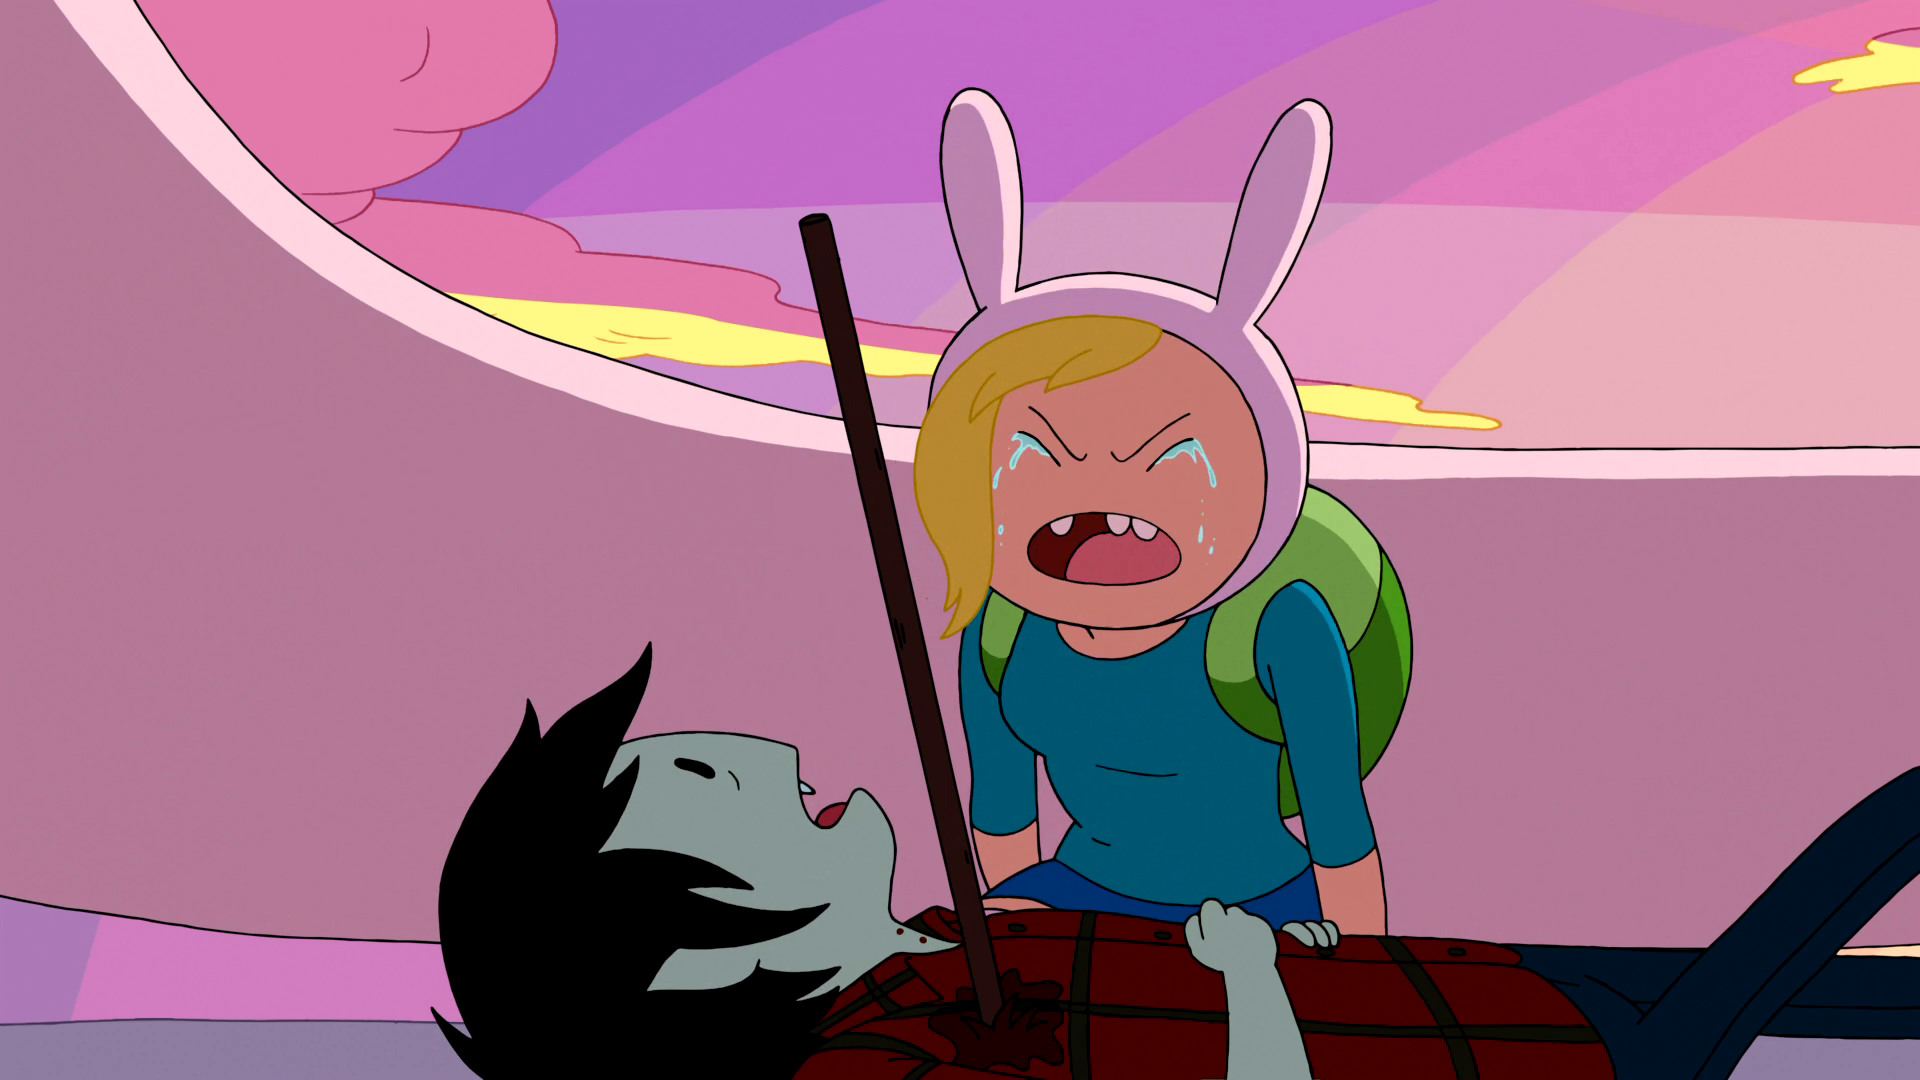 Image S5e11 Fionna Screaming Png Adventure Time Wiki